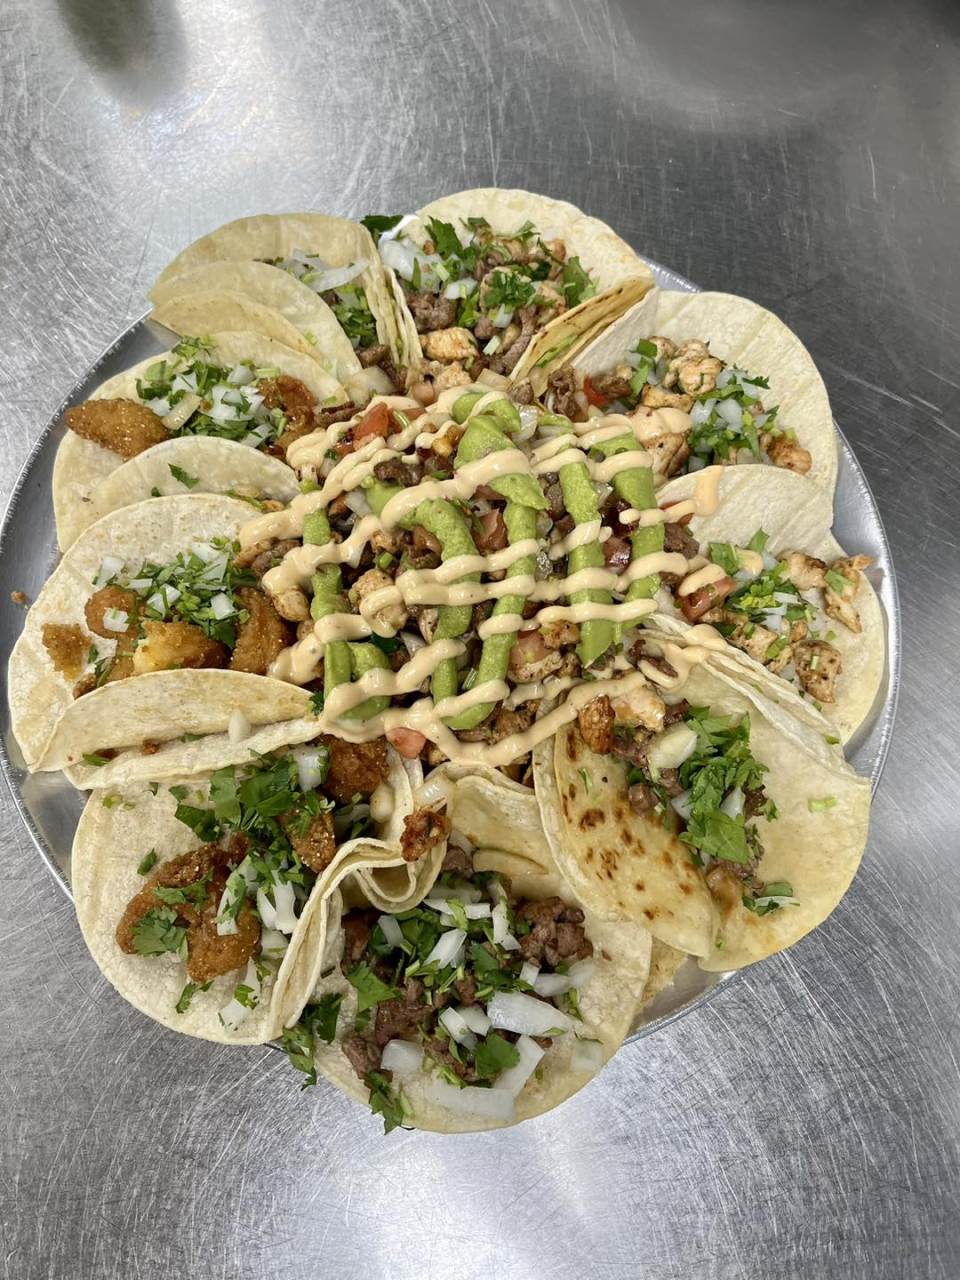 Dig into the taco platter at Top Shelf Bar & Grill